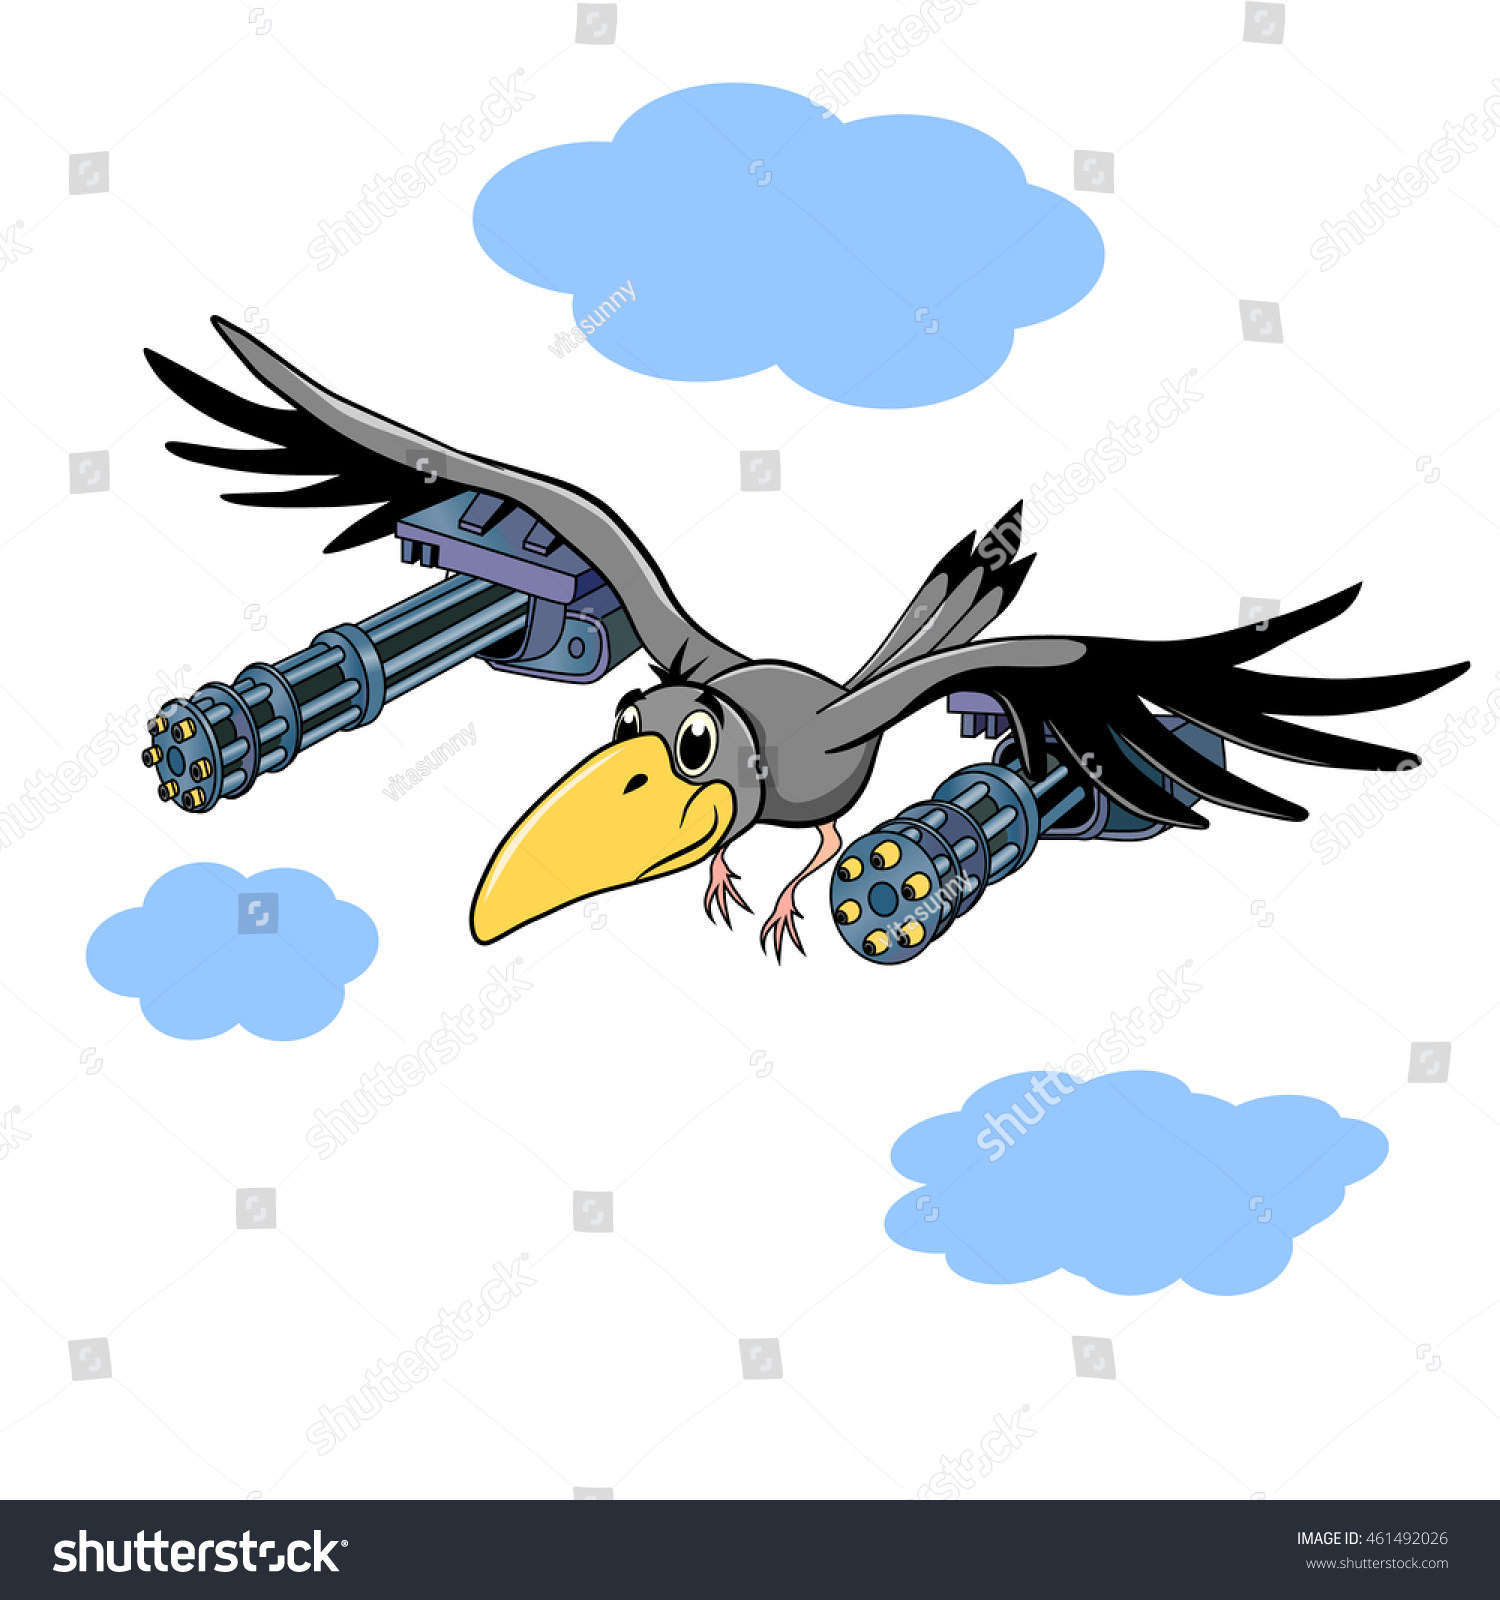 stock-vector-cartoon-fanny-fighting-crow-fighter-with-two-machine-guns-under-the-wings-461492026.jpg